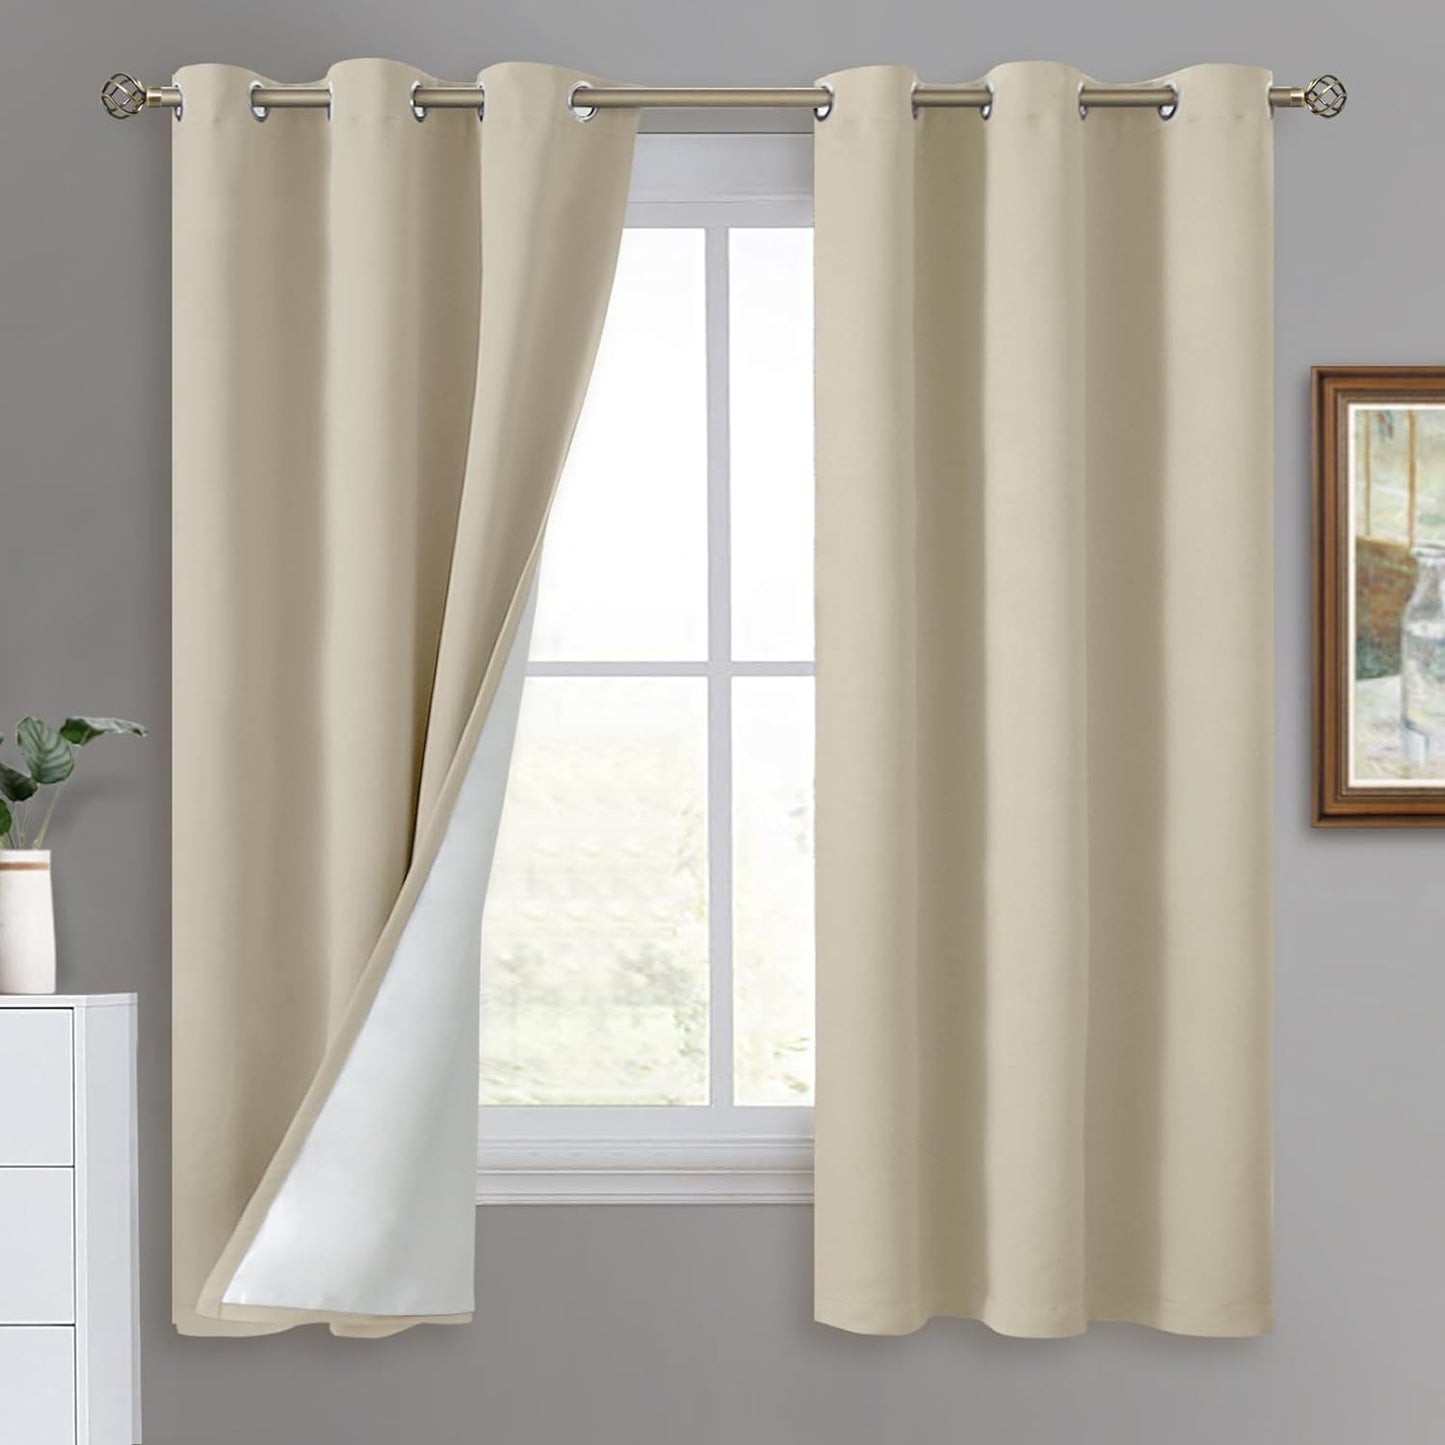 QUEMAS Short Blackout Curtains 54 Inch Length 2 Panels, 100% Light Blocking Thermal Insulated Soundproof Grommet Small Window Curtains for Bedroom Basement with Black Liner, Each 42 Inch Wide, White  QUEMAS Beige + White Lining W42 X L63 